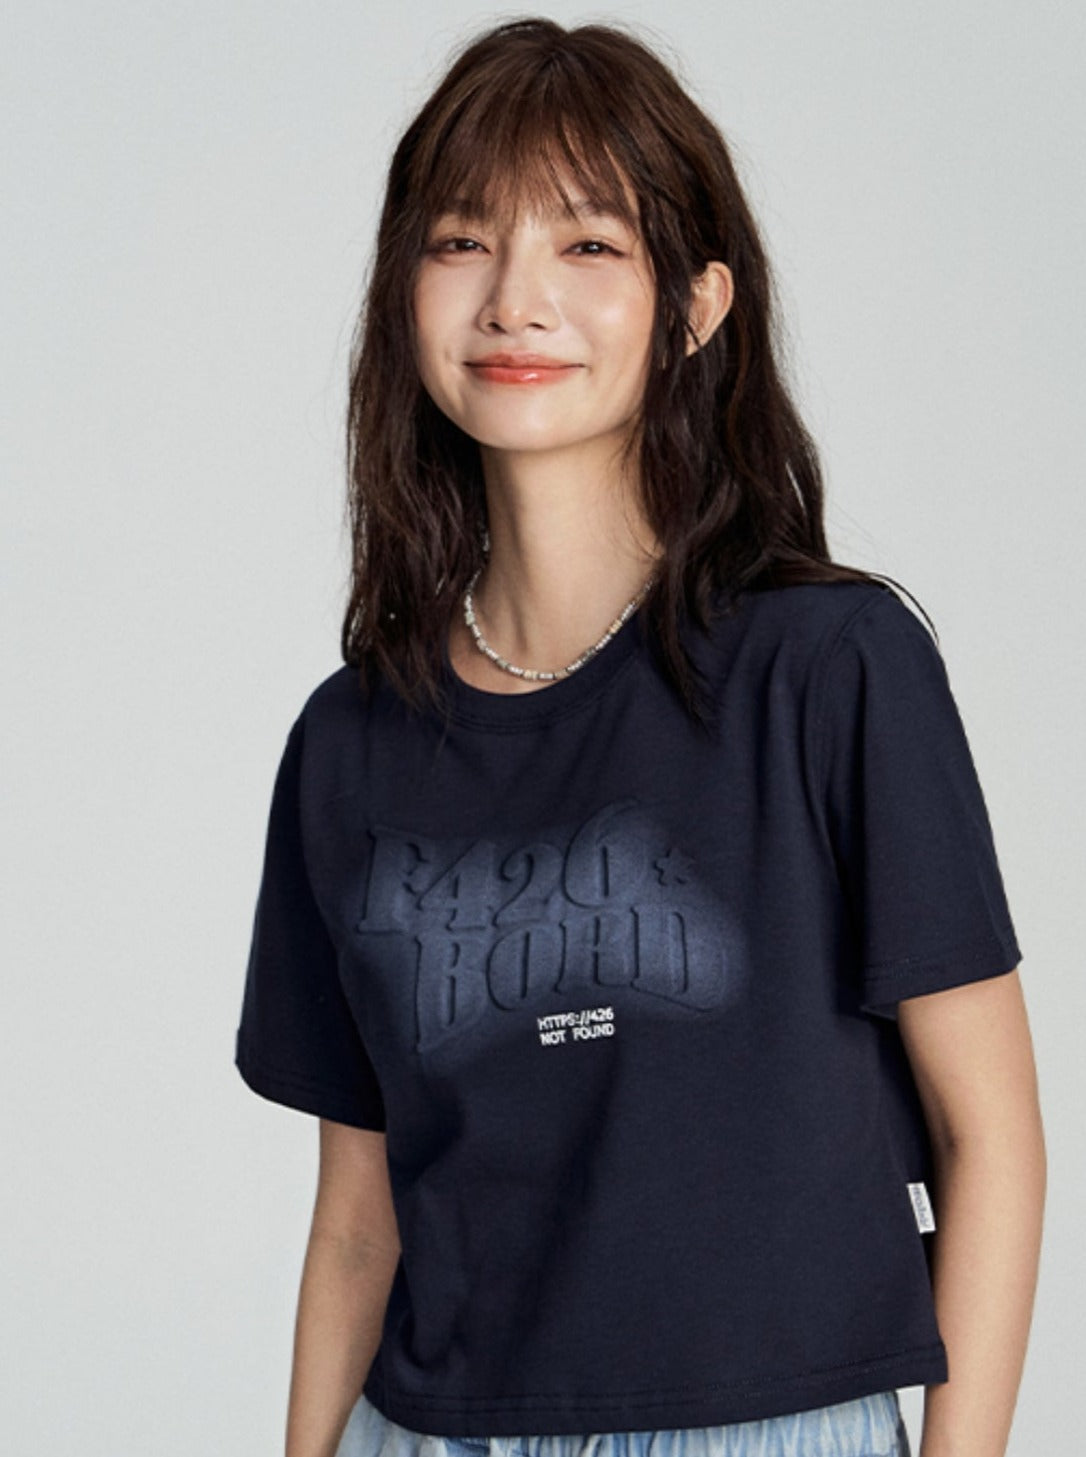 Tee with Embossed Letter Design - chiclara